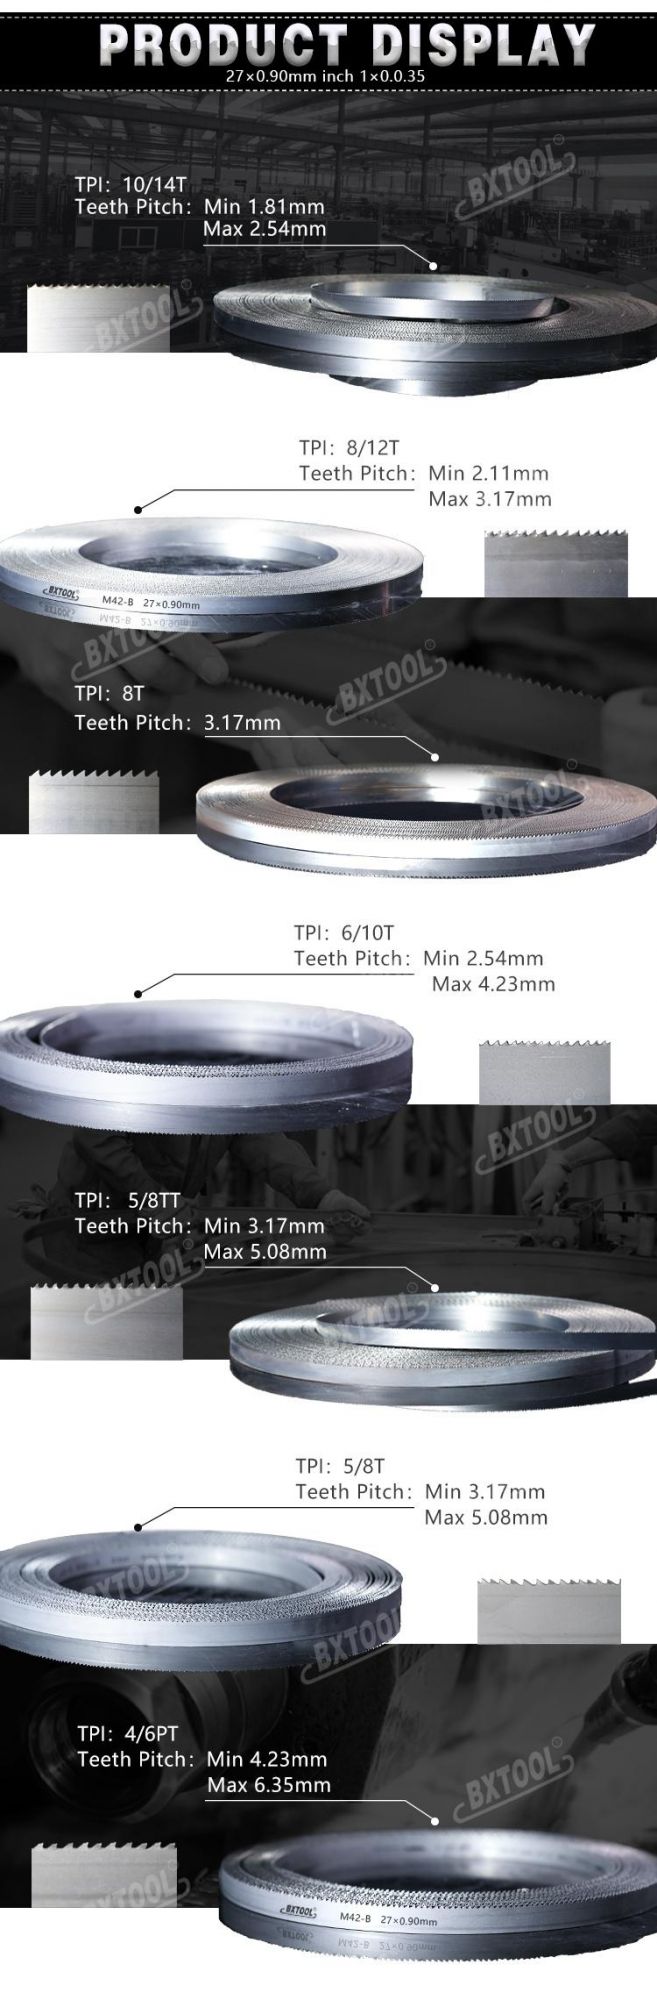 Bxtool High Quality M42 HSS Metal Carbon Cutting Band-Saw Blade for Band Sawing Machine